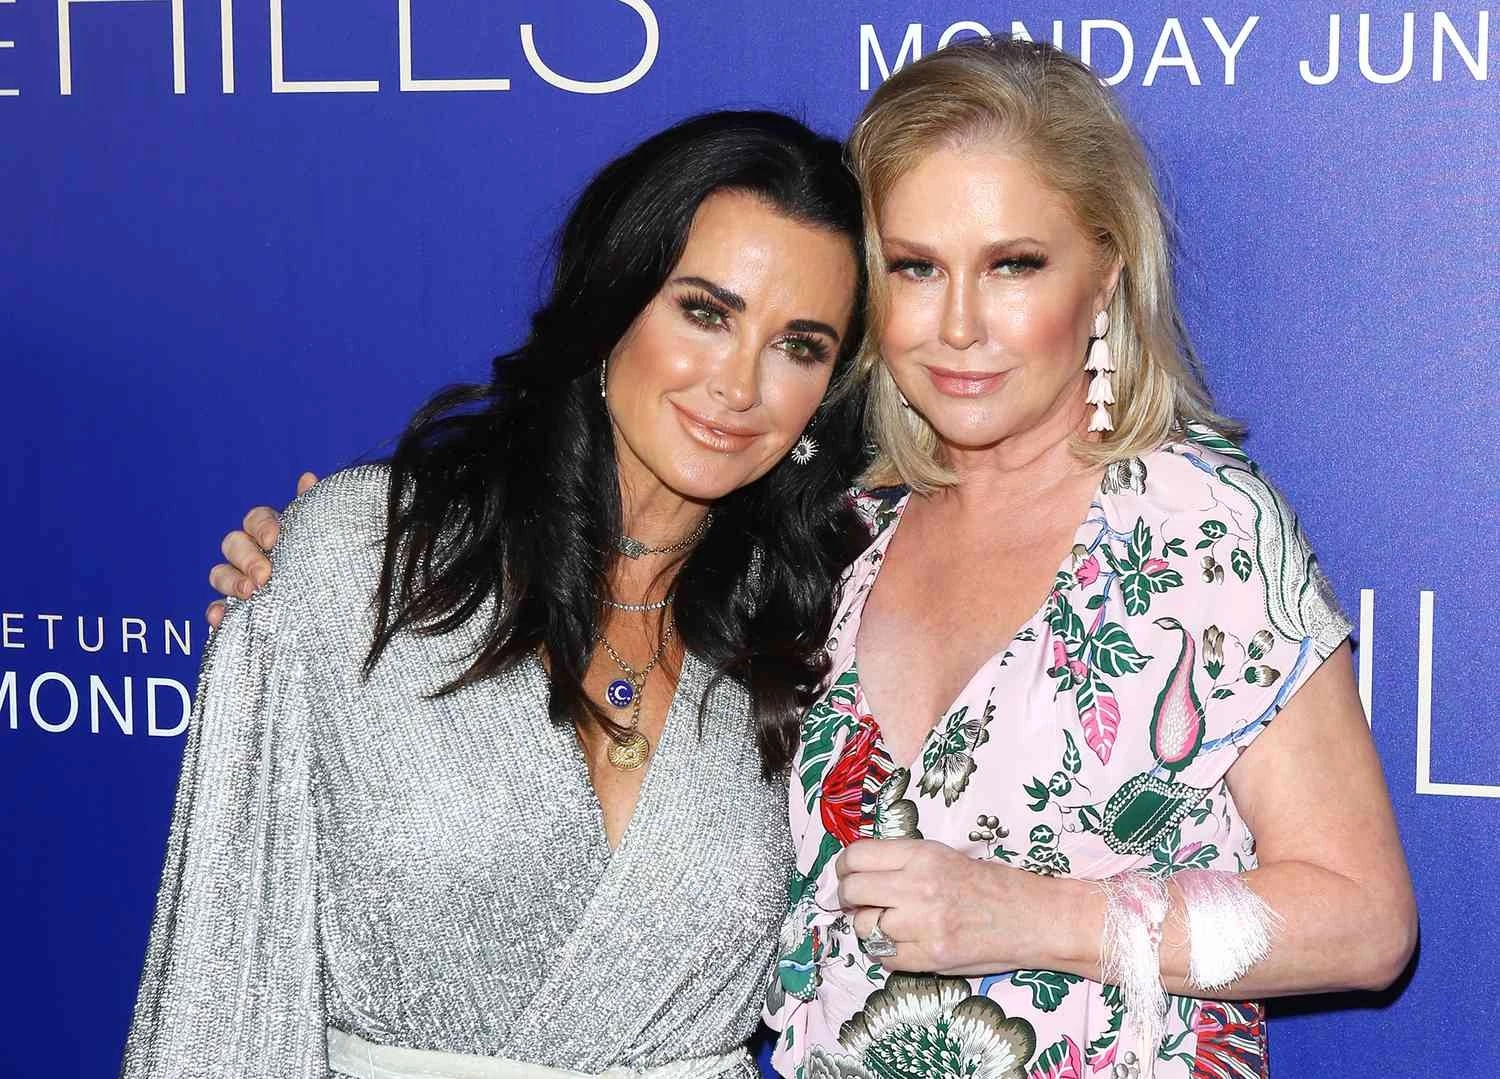 Real Housewives Of Beverly Hills S13E8 Sees Kyle Richards Opens Up About Her Struggles With Sister Kathy Hilton